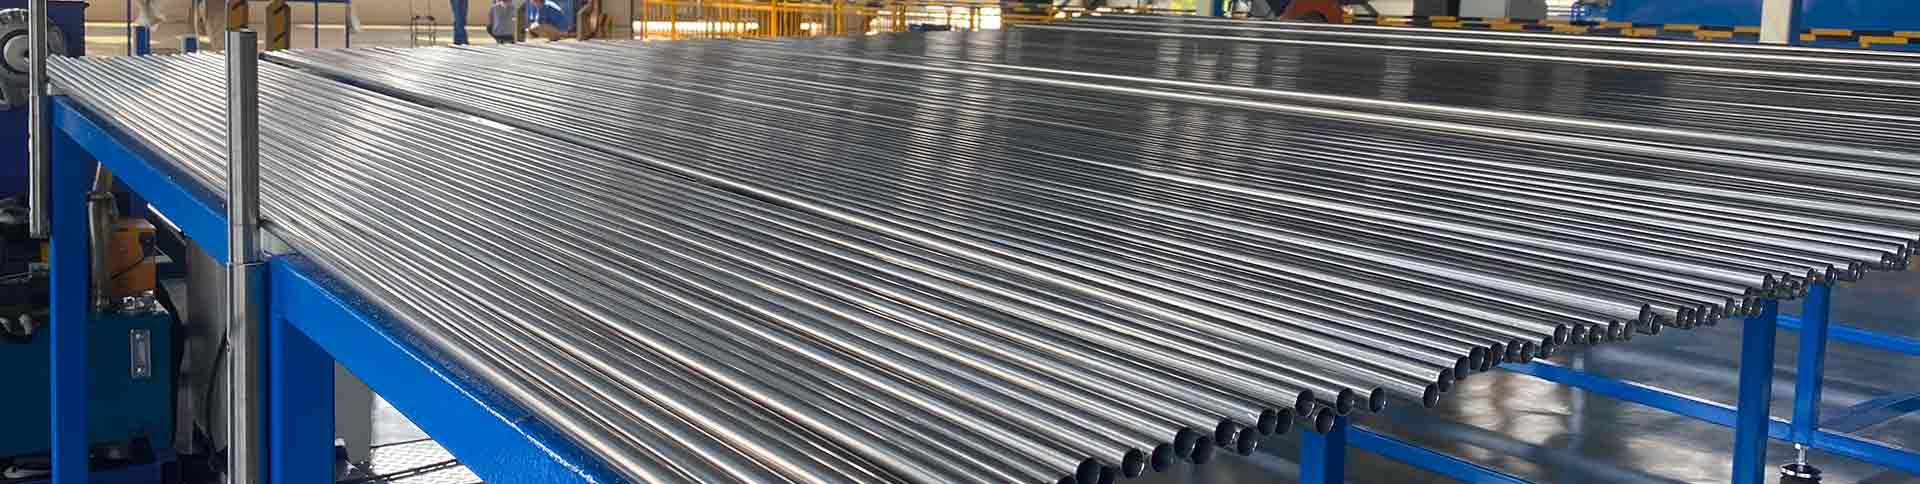 How to Weld Stainless Steel Seamless Pipes?